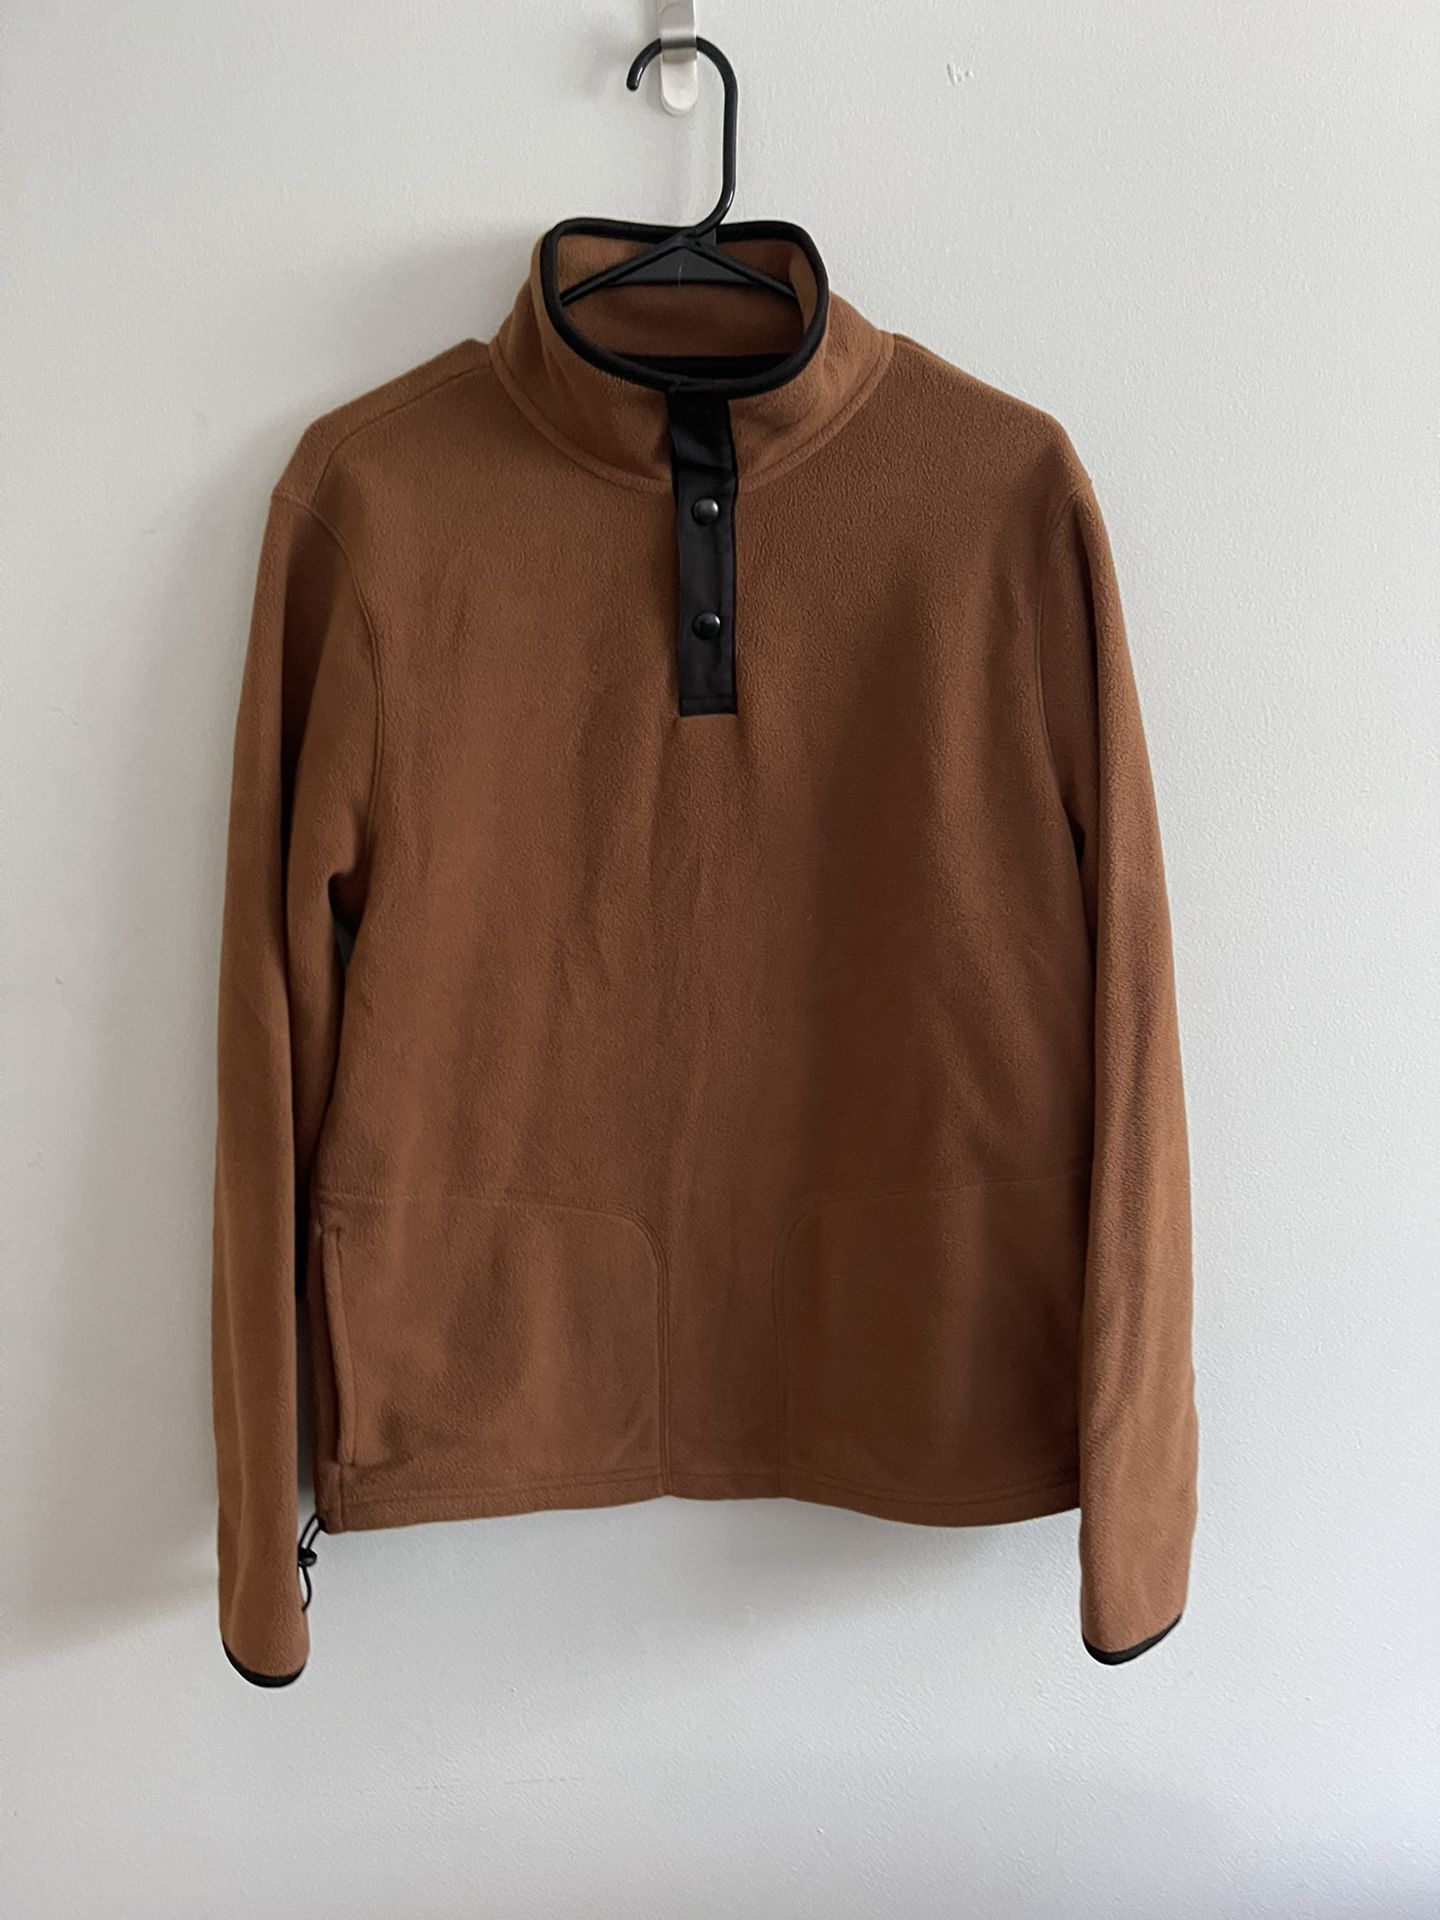 Mens pull Over Sweater Button Up 